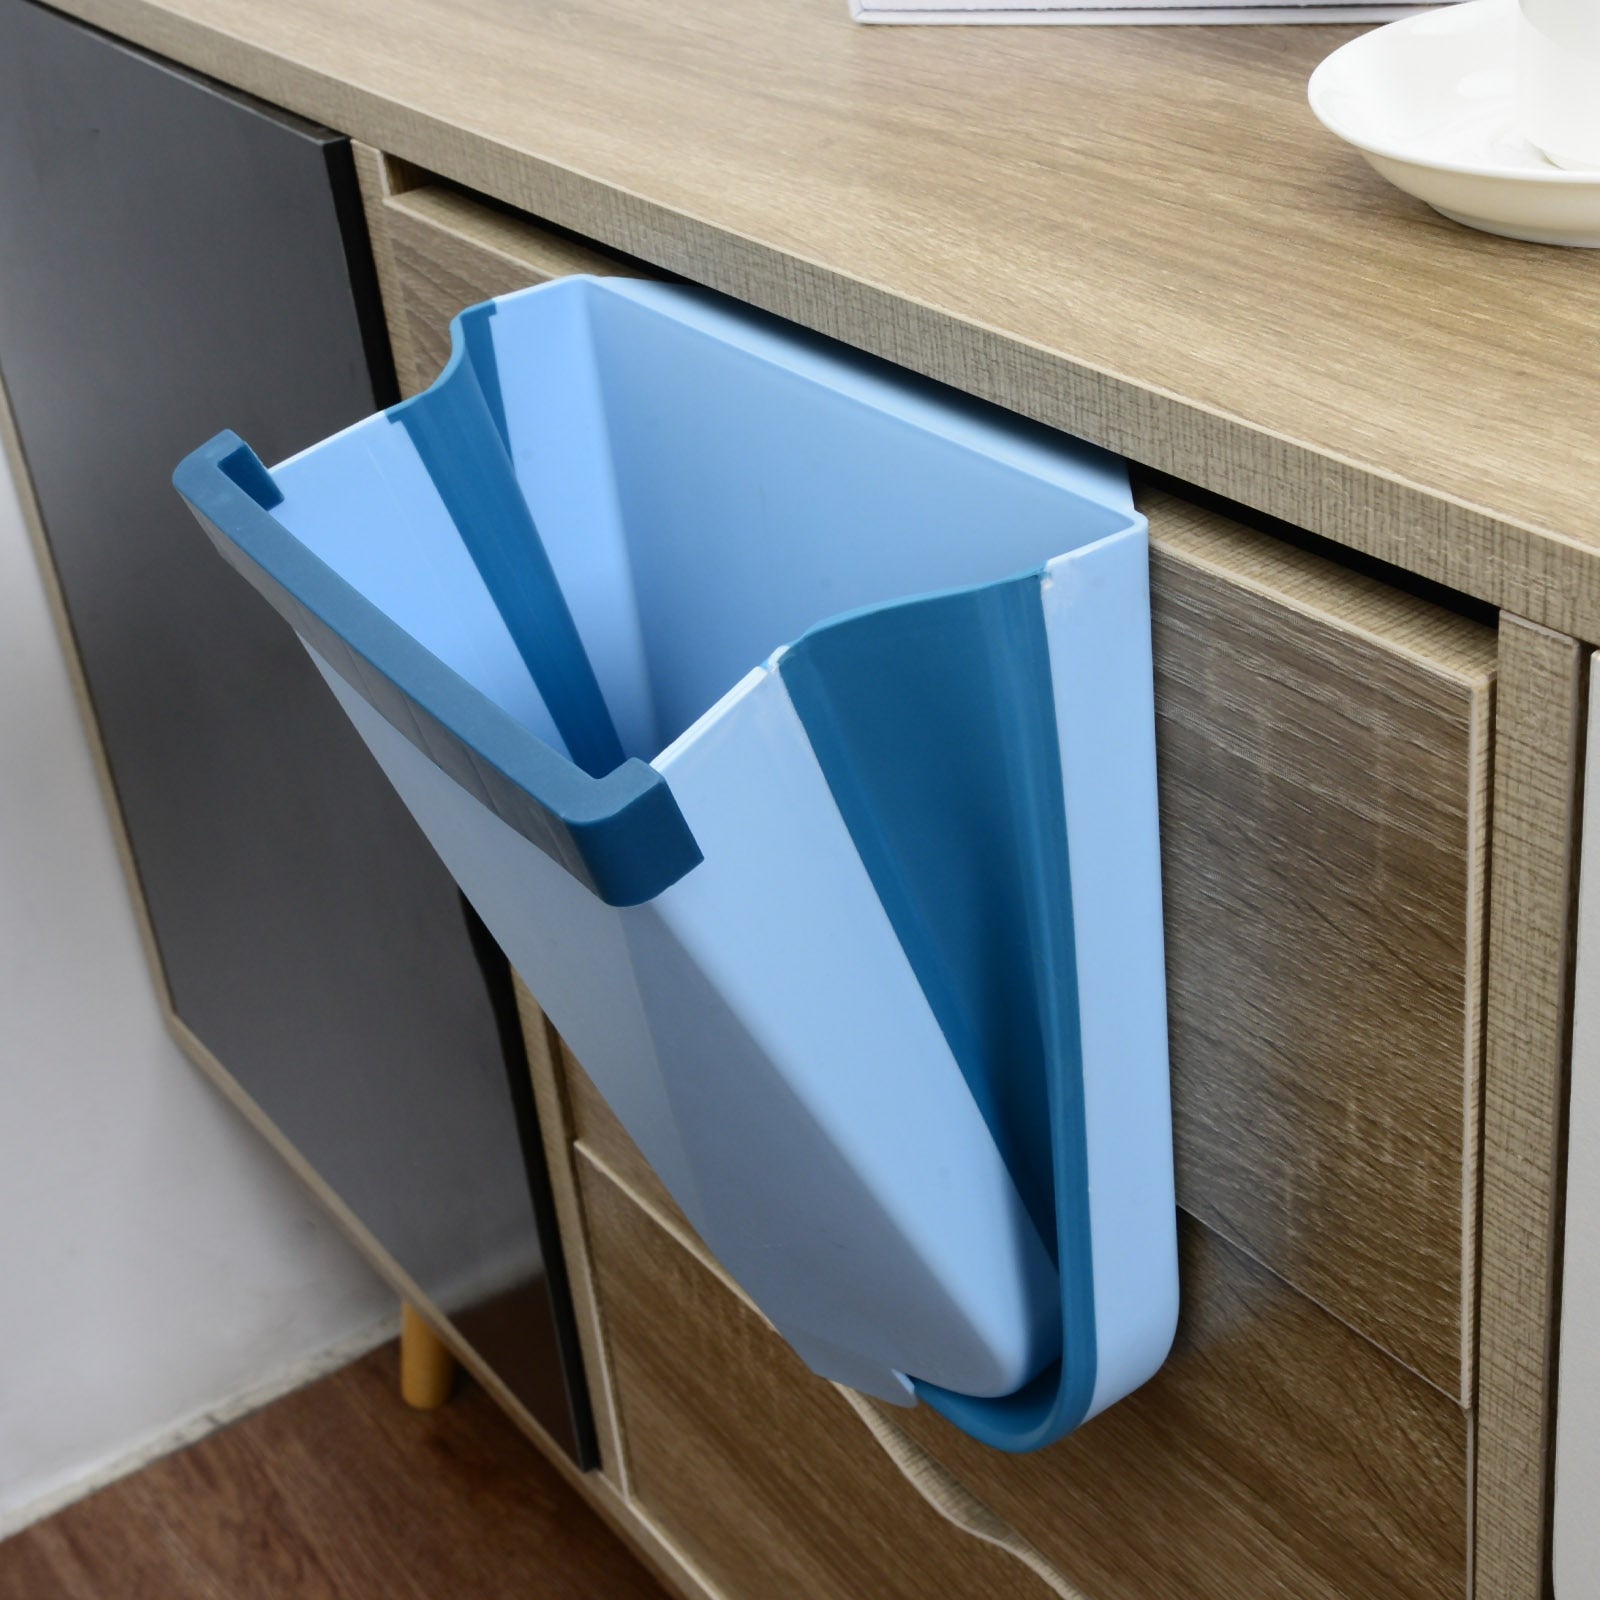 Folding Trash Can Wall Hanging Kitchen Cabinet – URBAN INVESTMENT STORE LLC